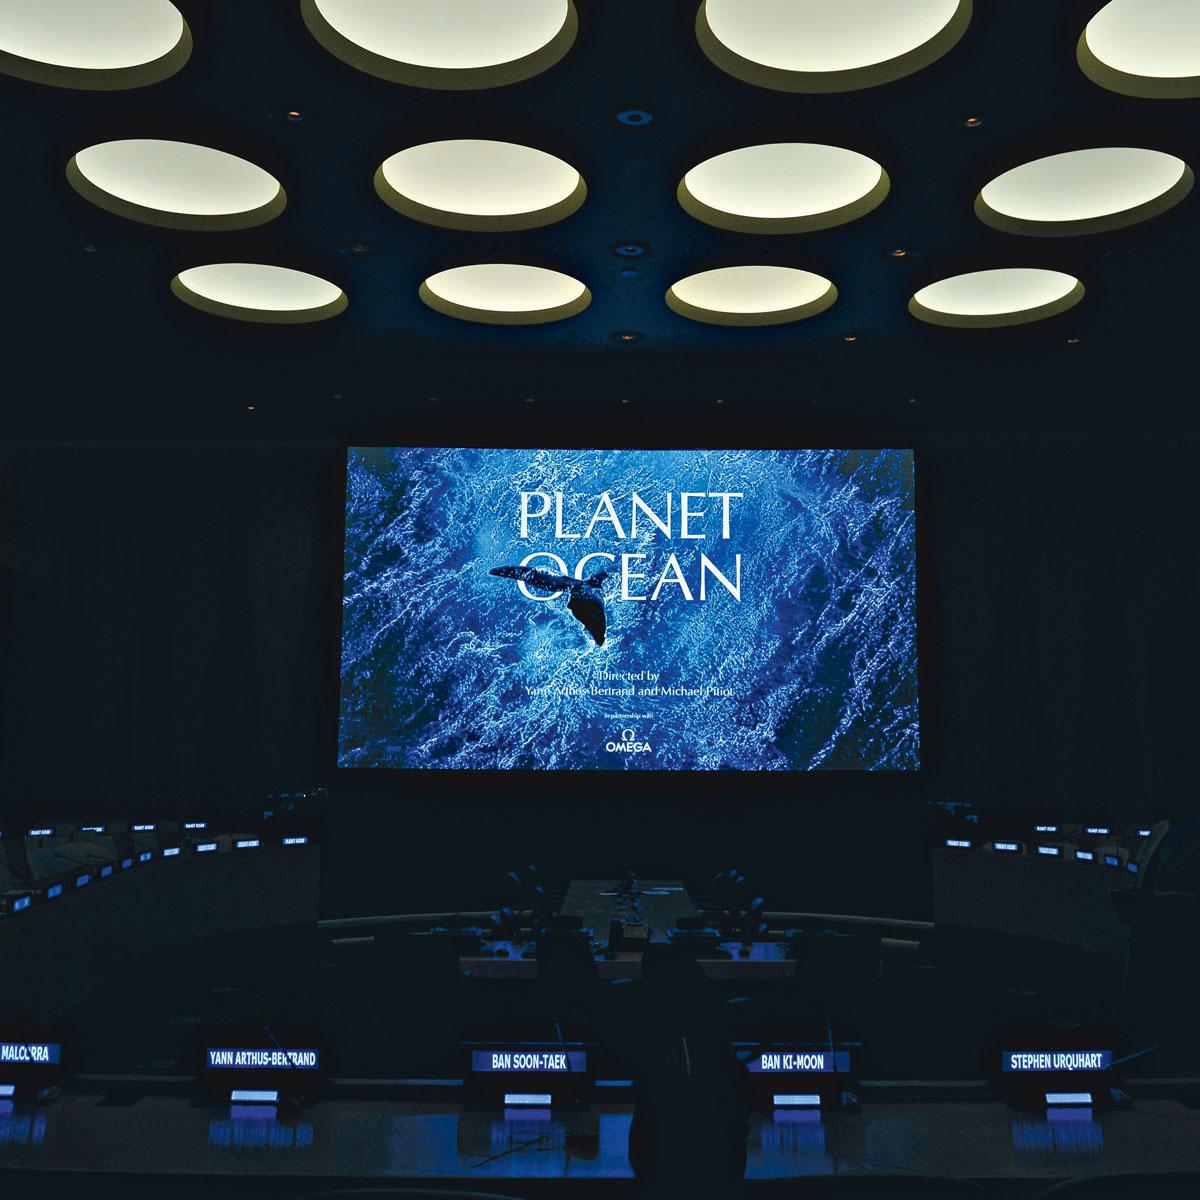 Planet Ocean at the United Nations, New York